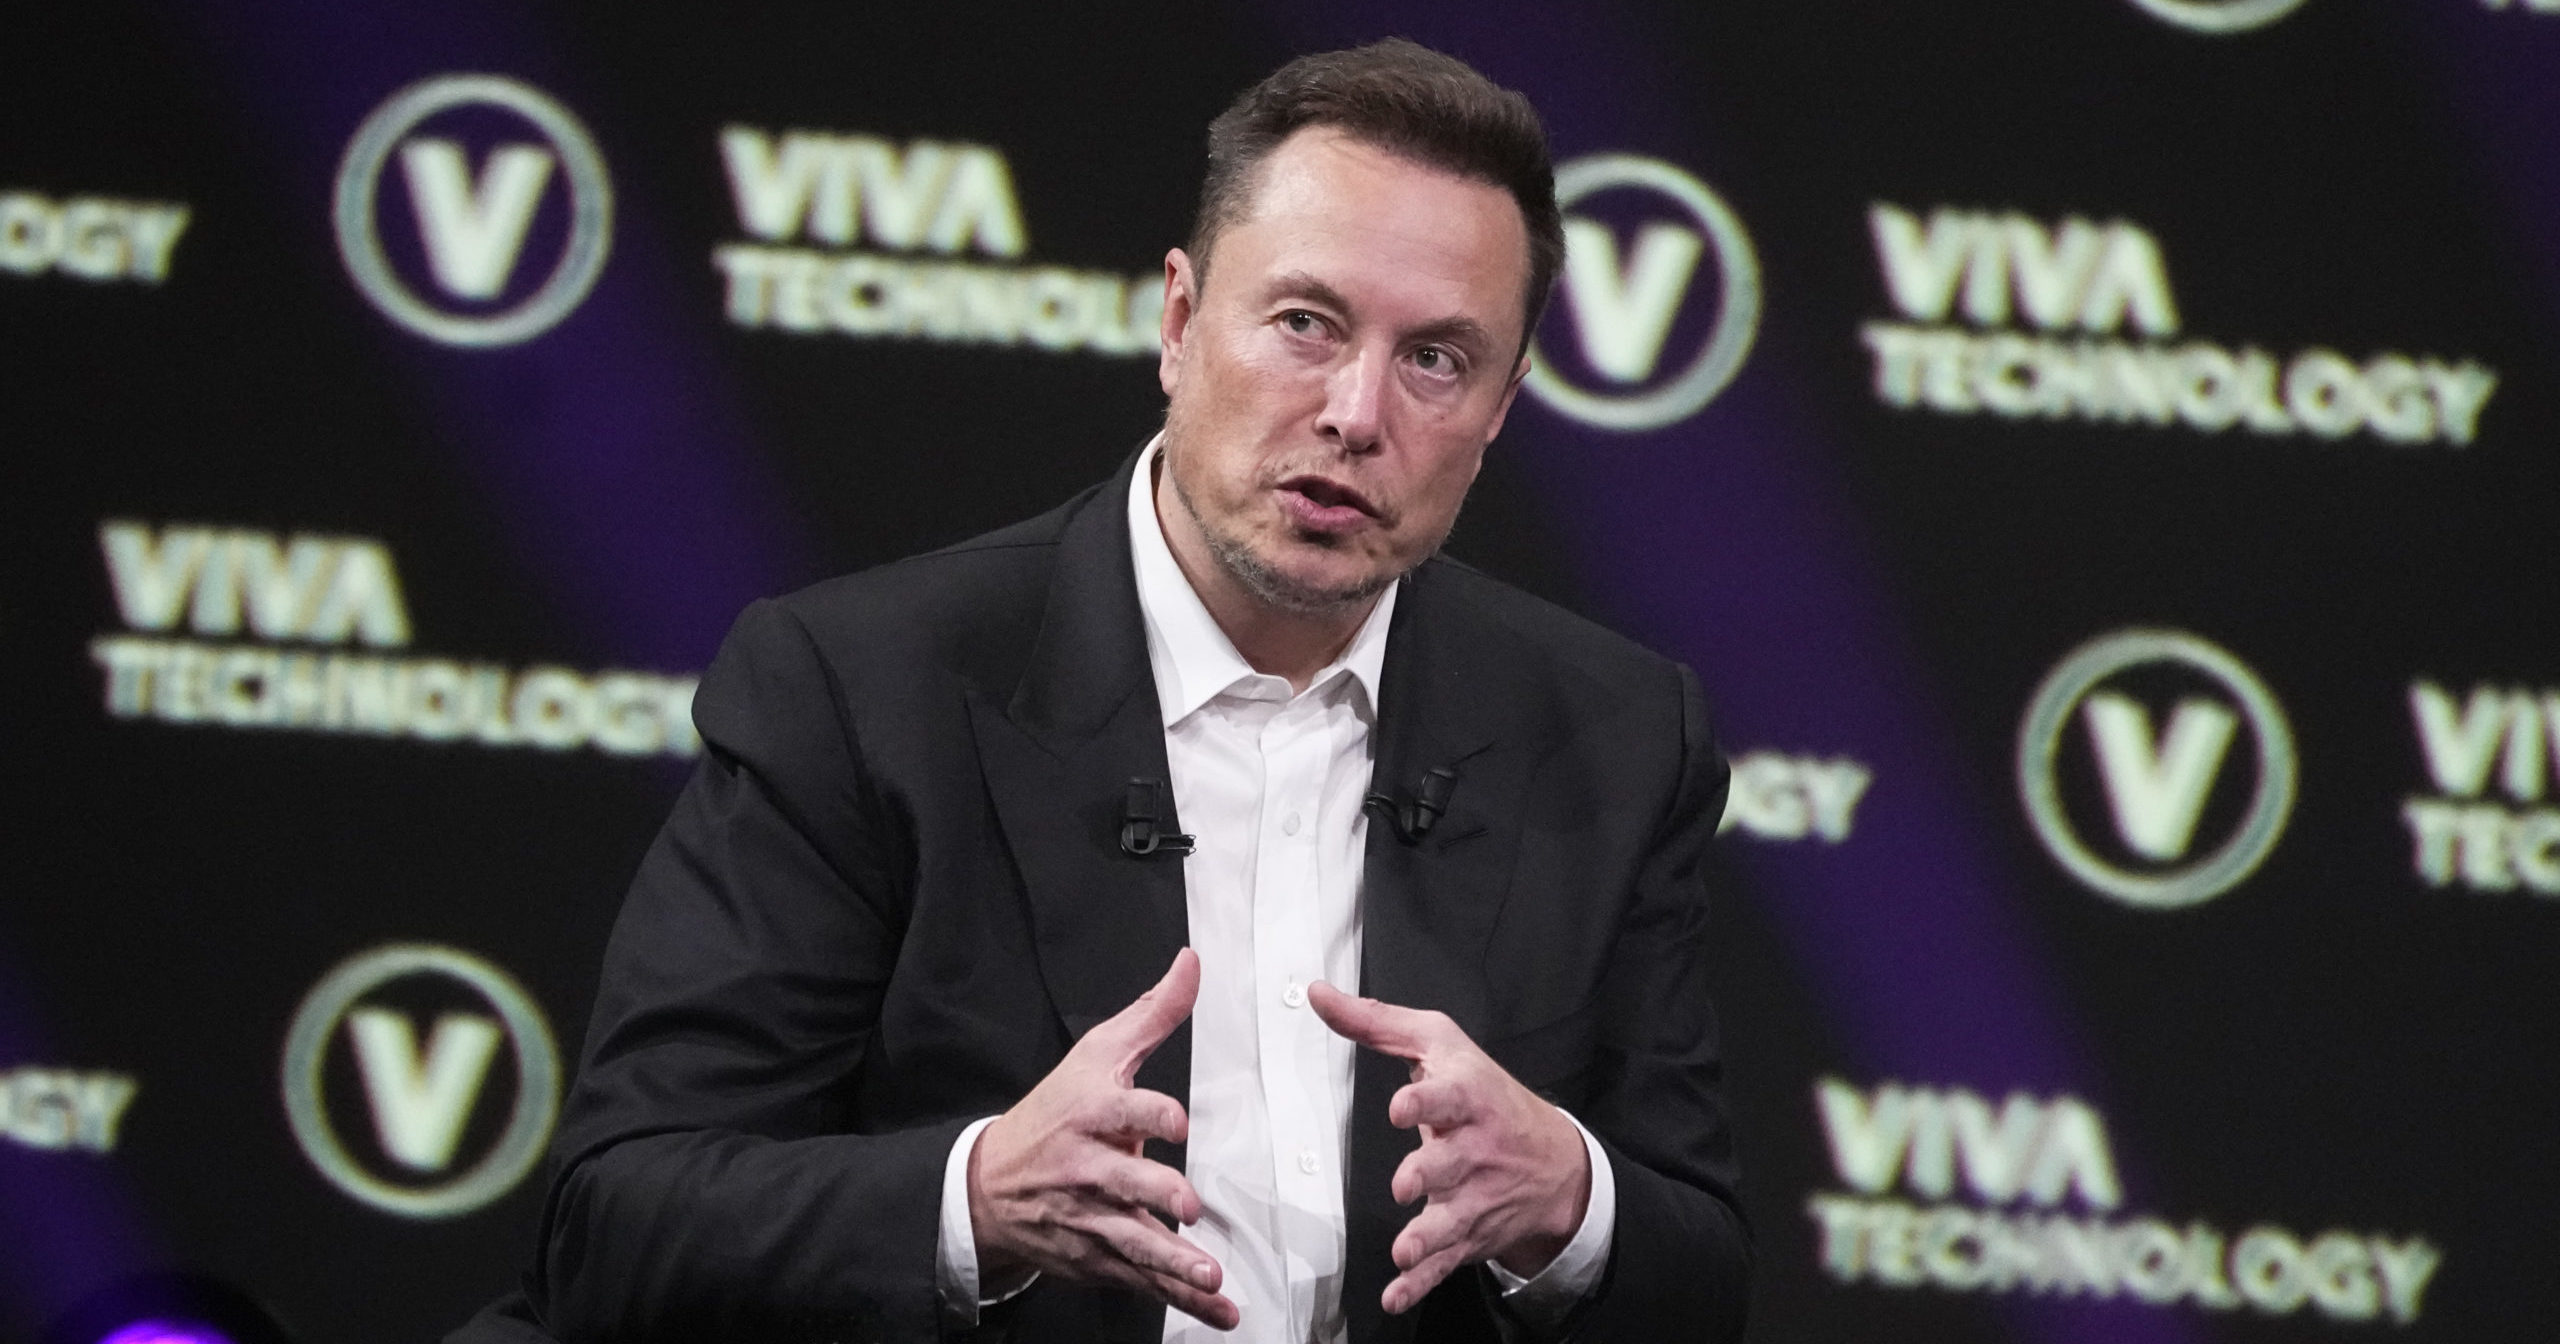 Elon Musk, who owns X, formerly known as Twitter, Tesla and SpaceX, speaks at the Vivatech fair, June 16, 2023, in Paris.